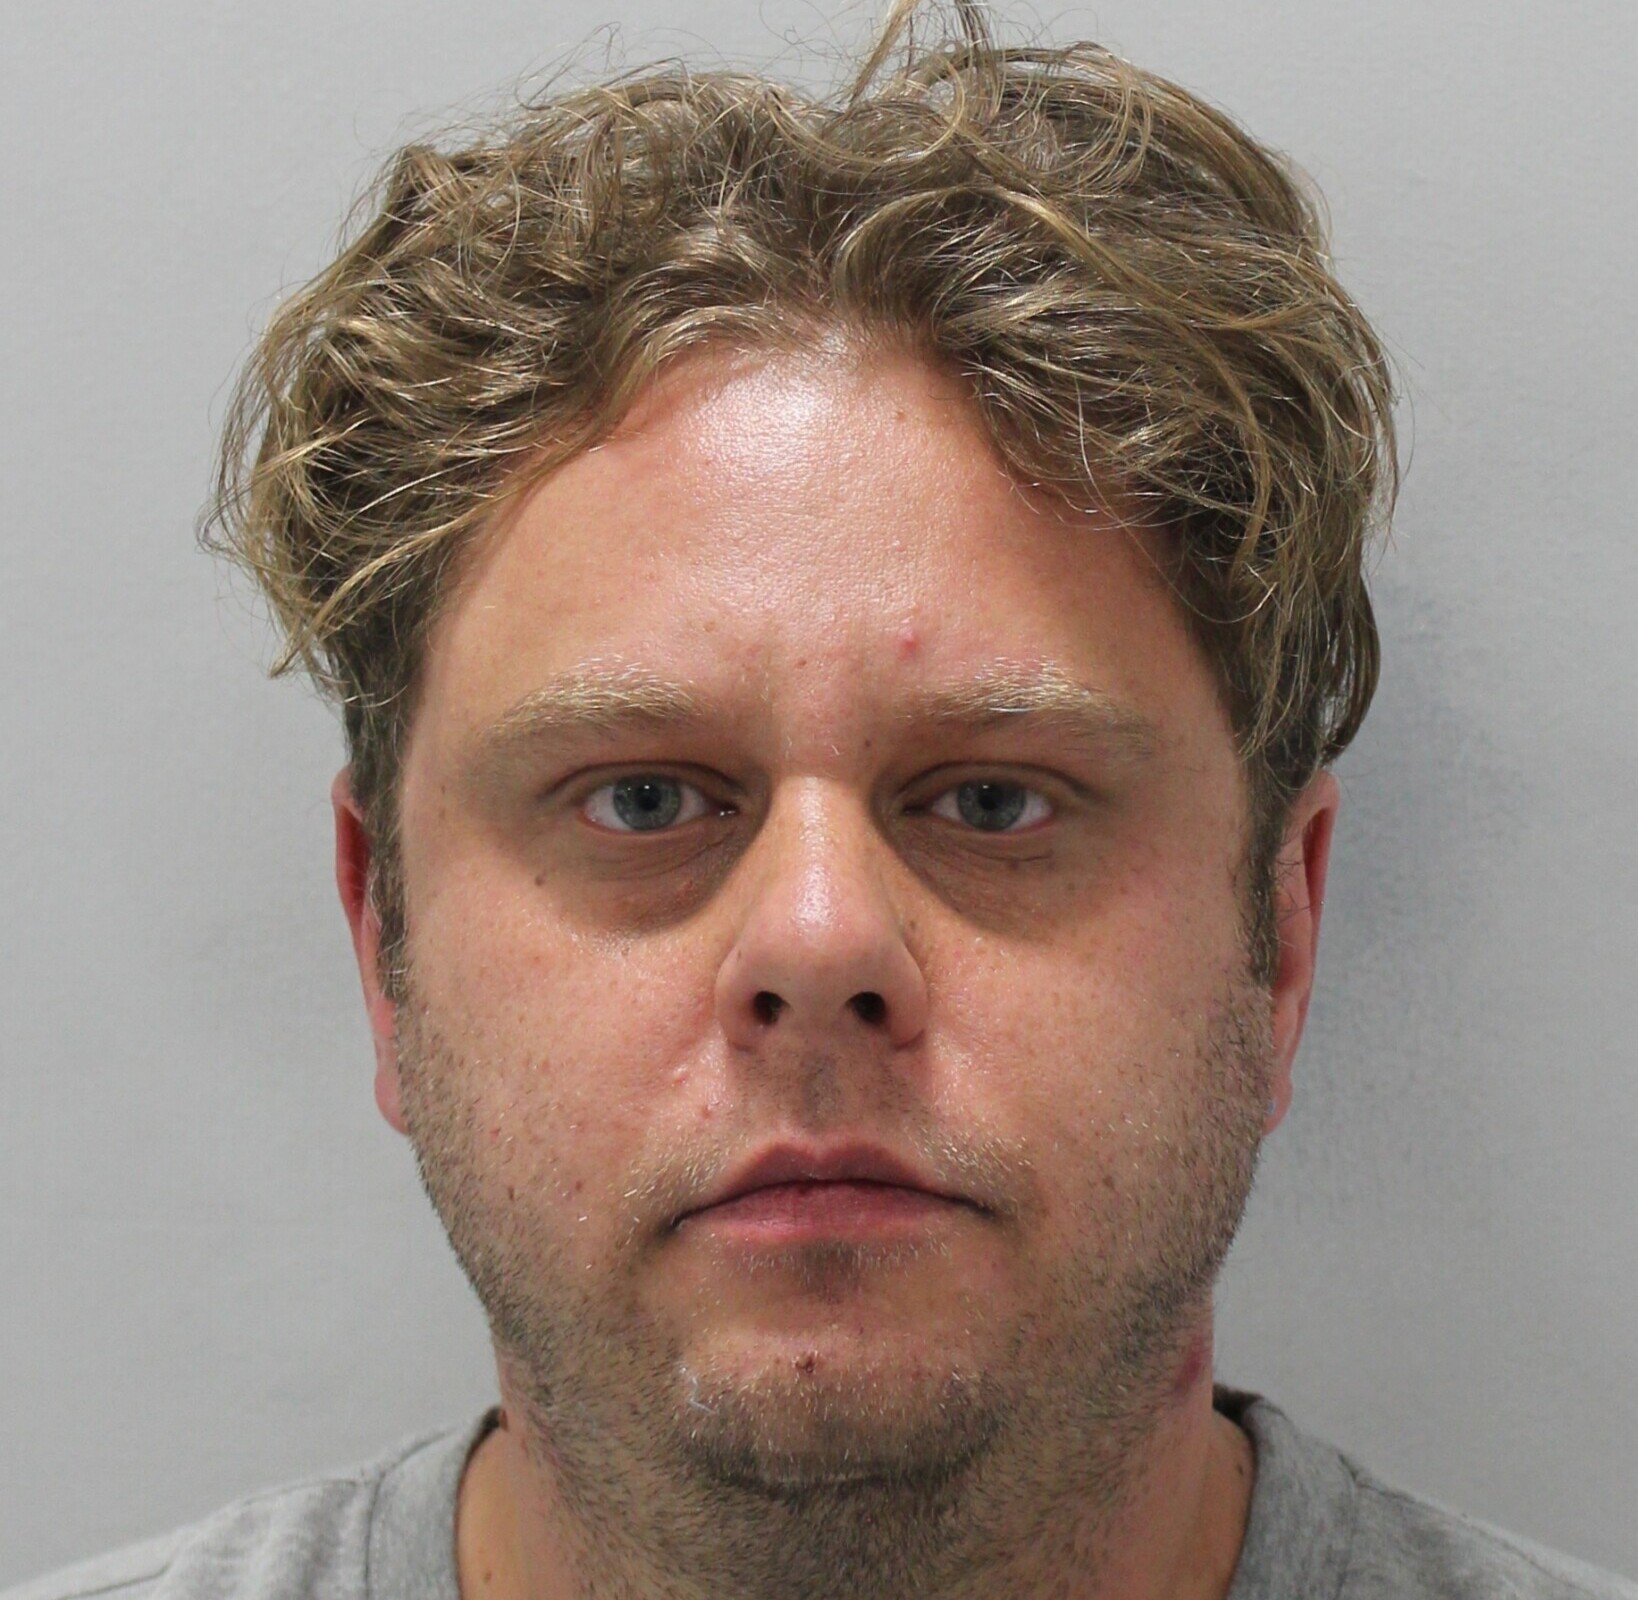 Man Sentenced To Hospital Order After Breaking Into Woman S House To Sexually Assault Her